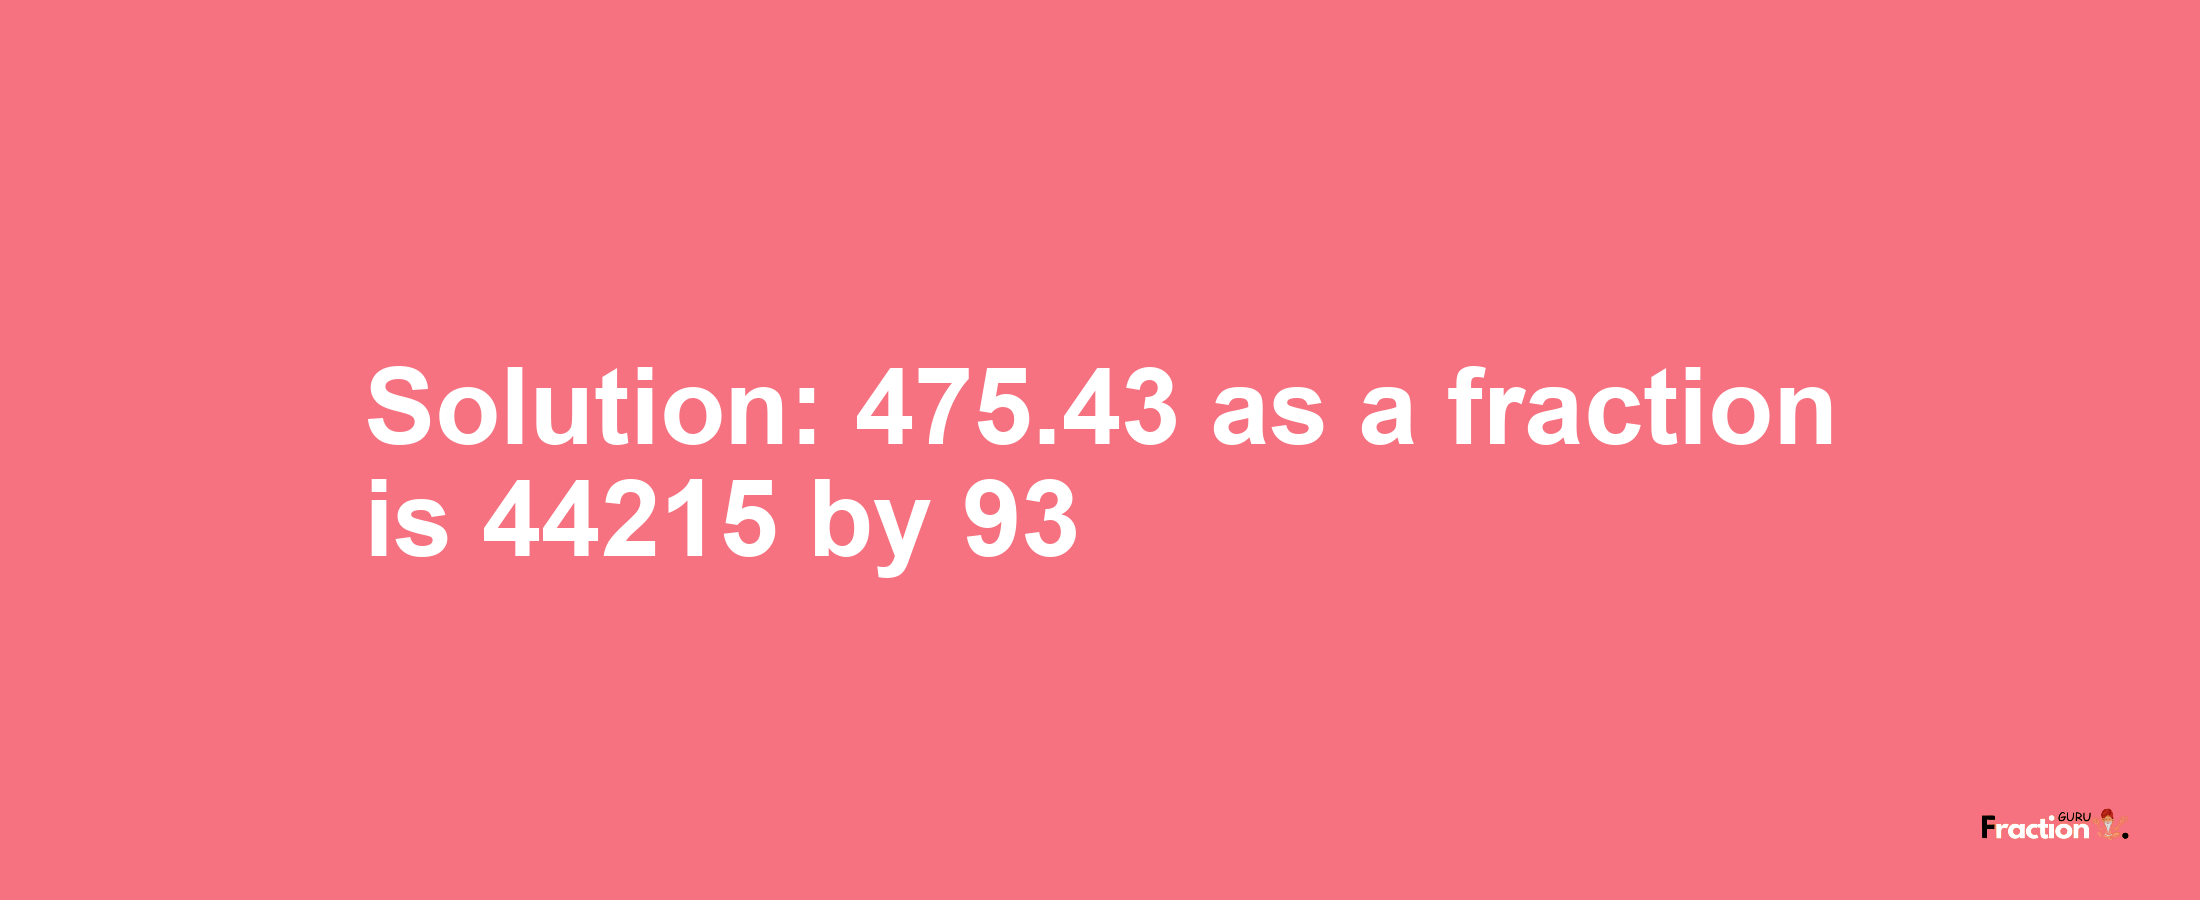 Solution:475.43 as a fraction is 44215/93